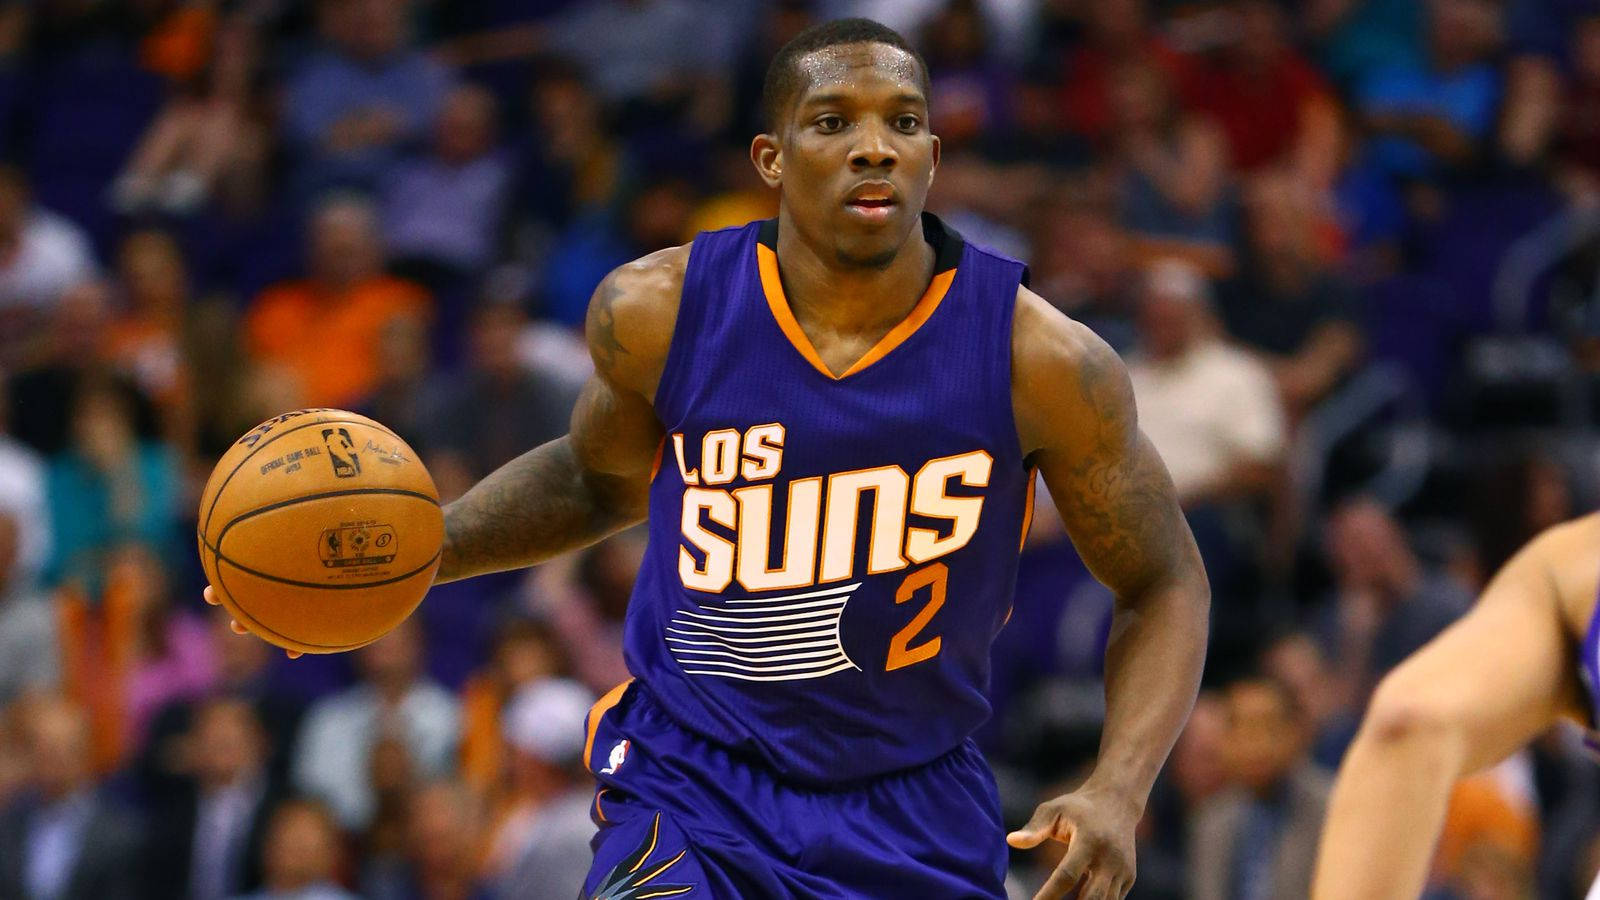 Professional Nba Player Eric Bledsoe Planning A Strategy During A Game. Background